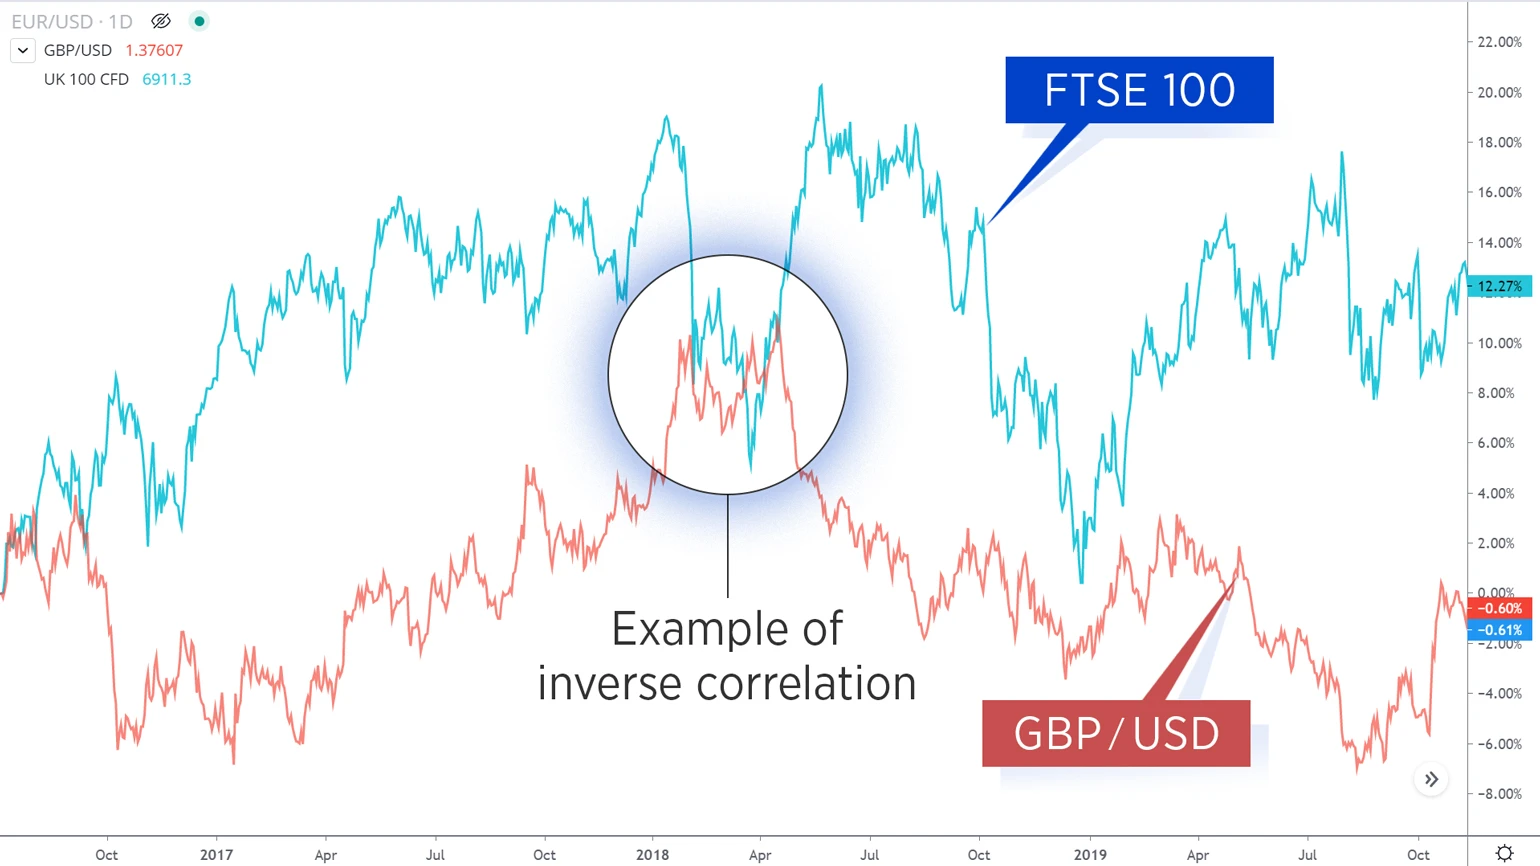 Inverse correlation between FTSE 100 and GBP/USD